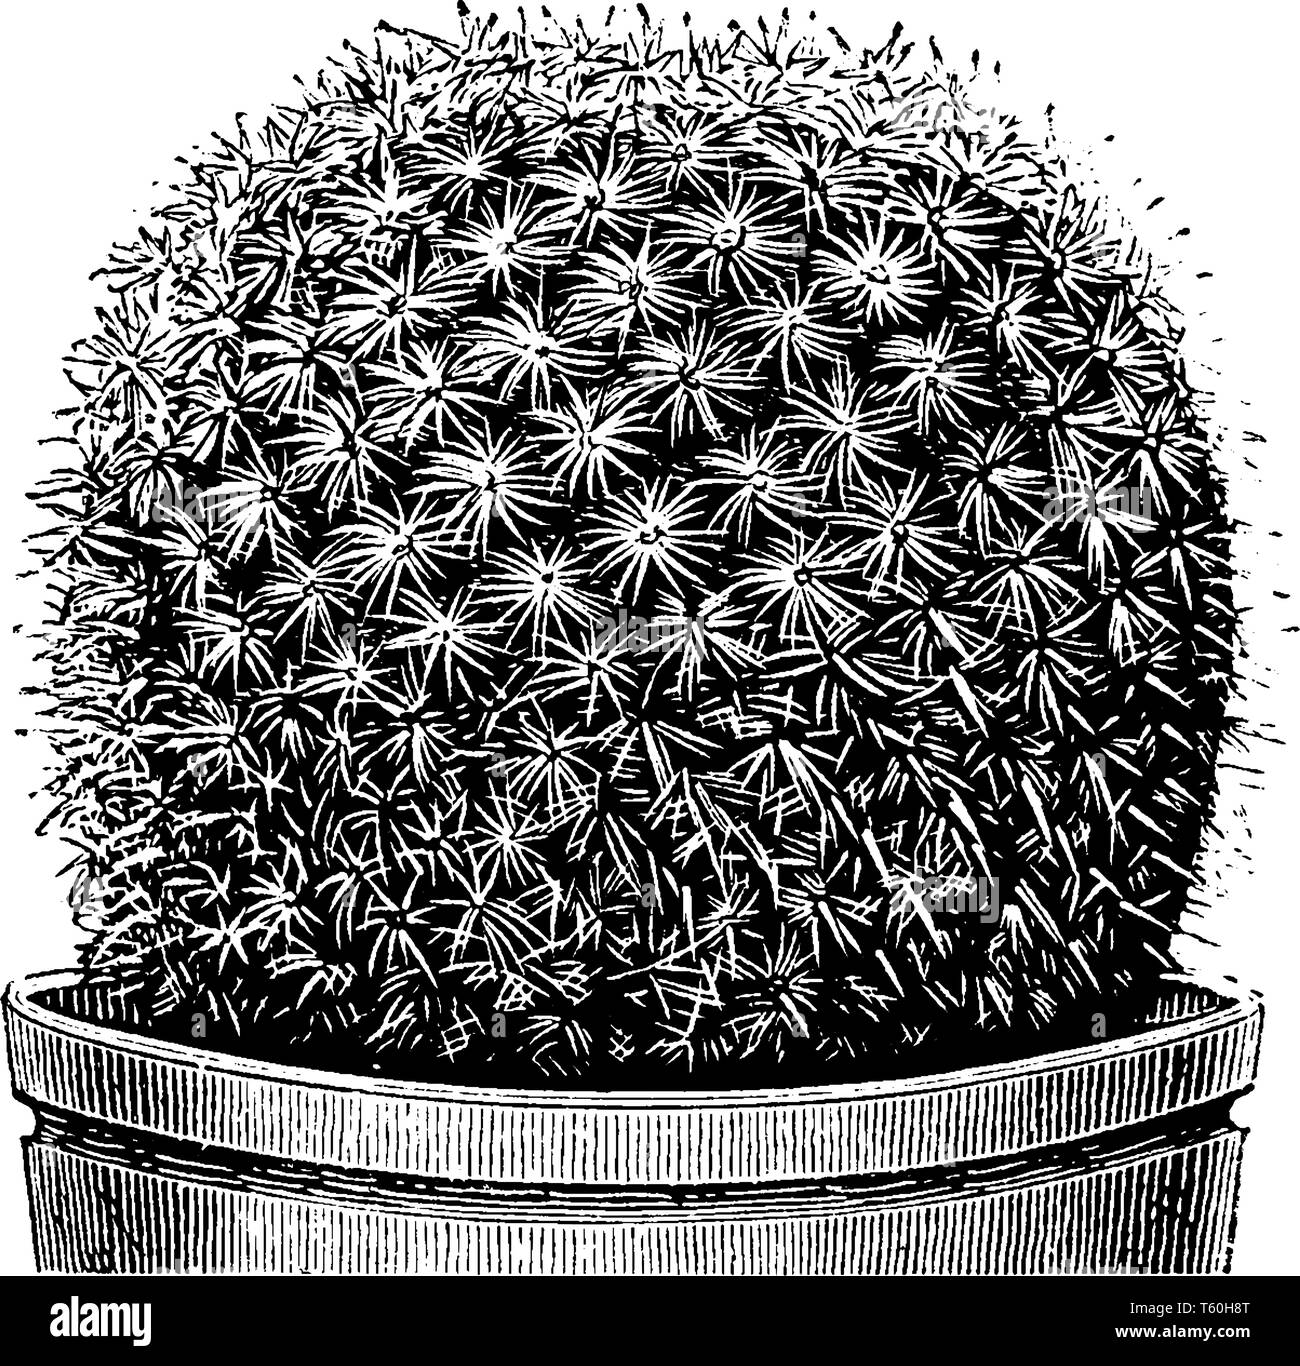 A picture showing the plant of Mammillaria Haageana. Mammillaria Haageana is a cactus with bright carmine rose flowers, vintage line drawing or engrav Stock Vector